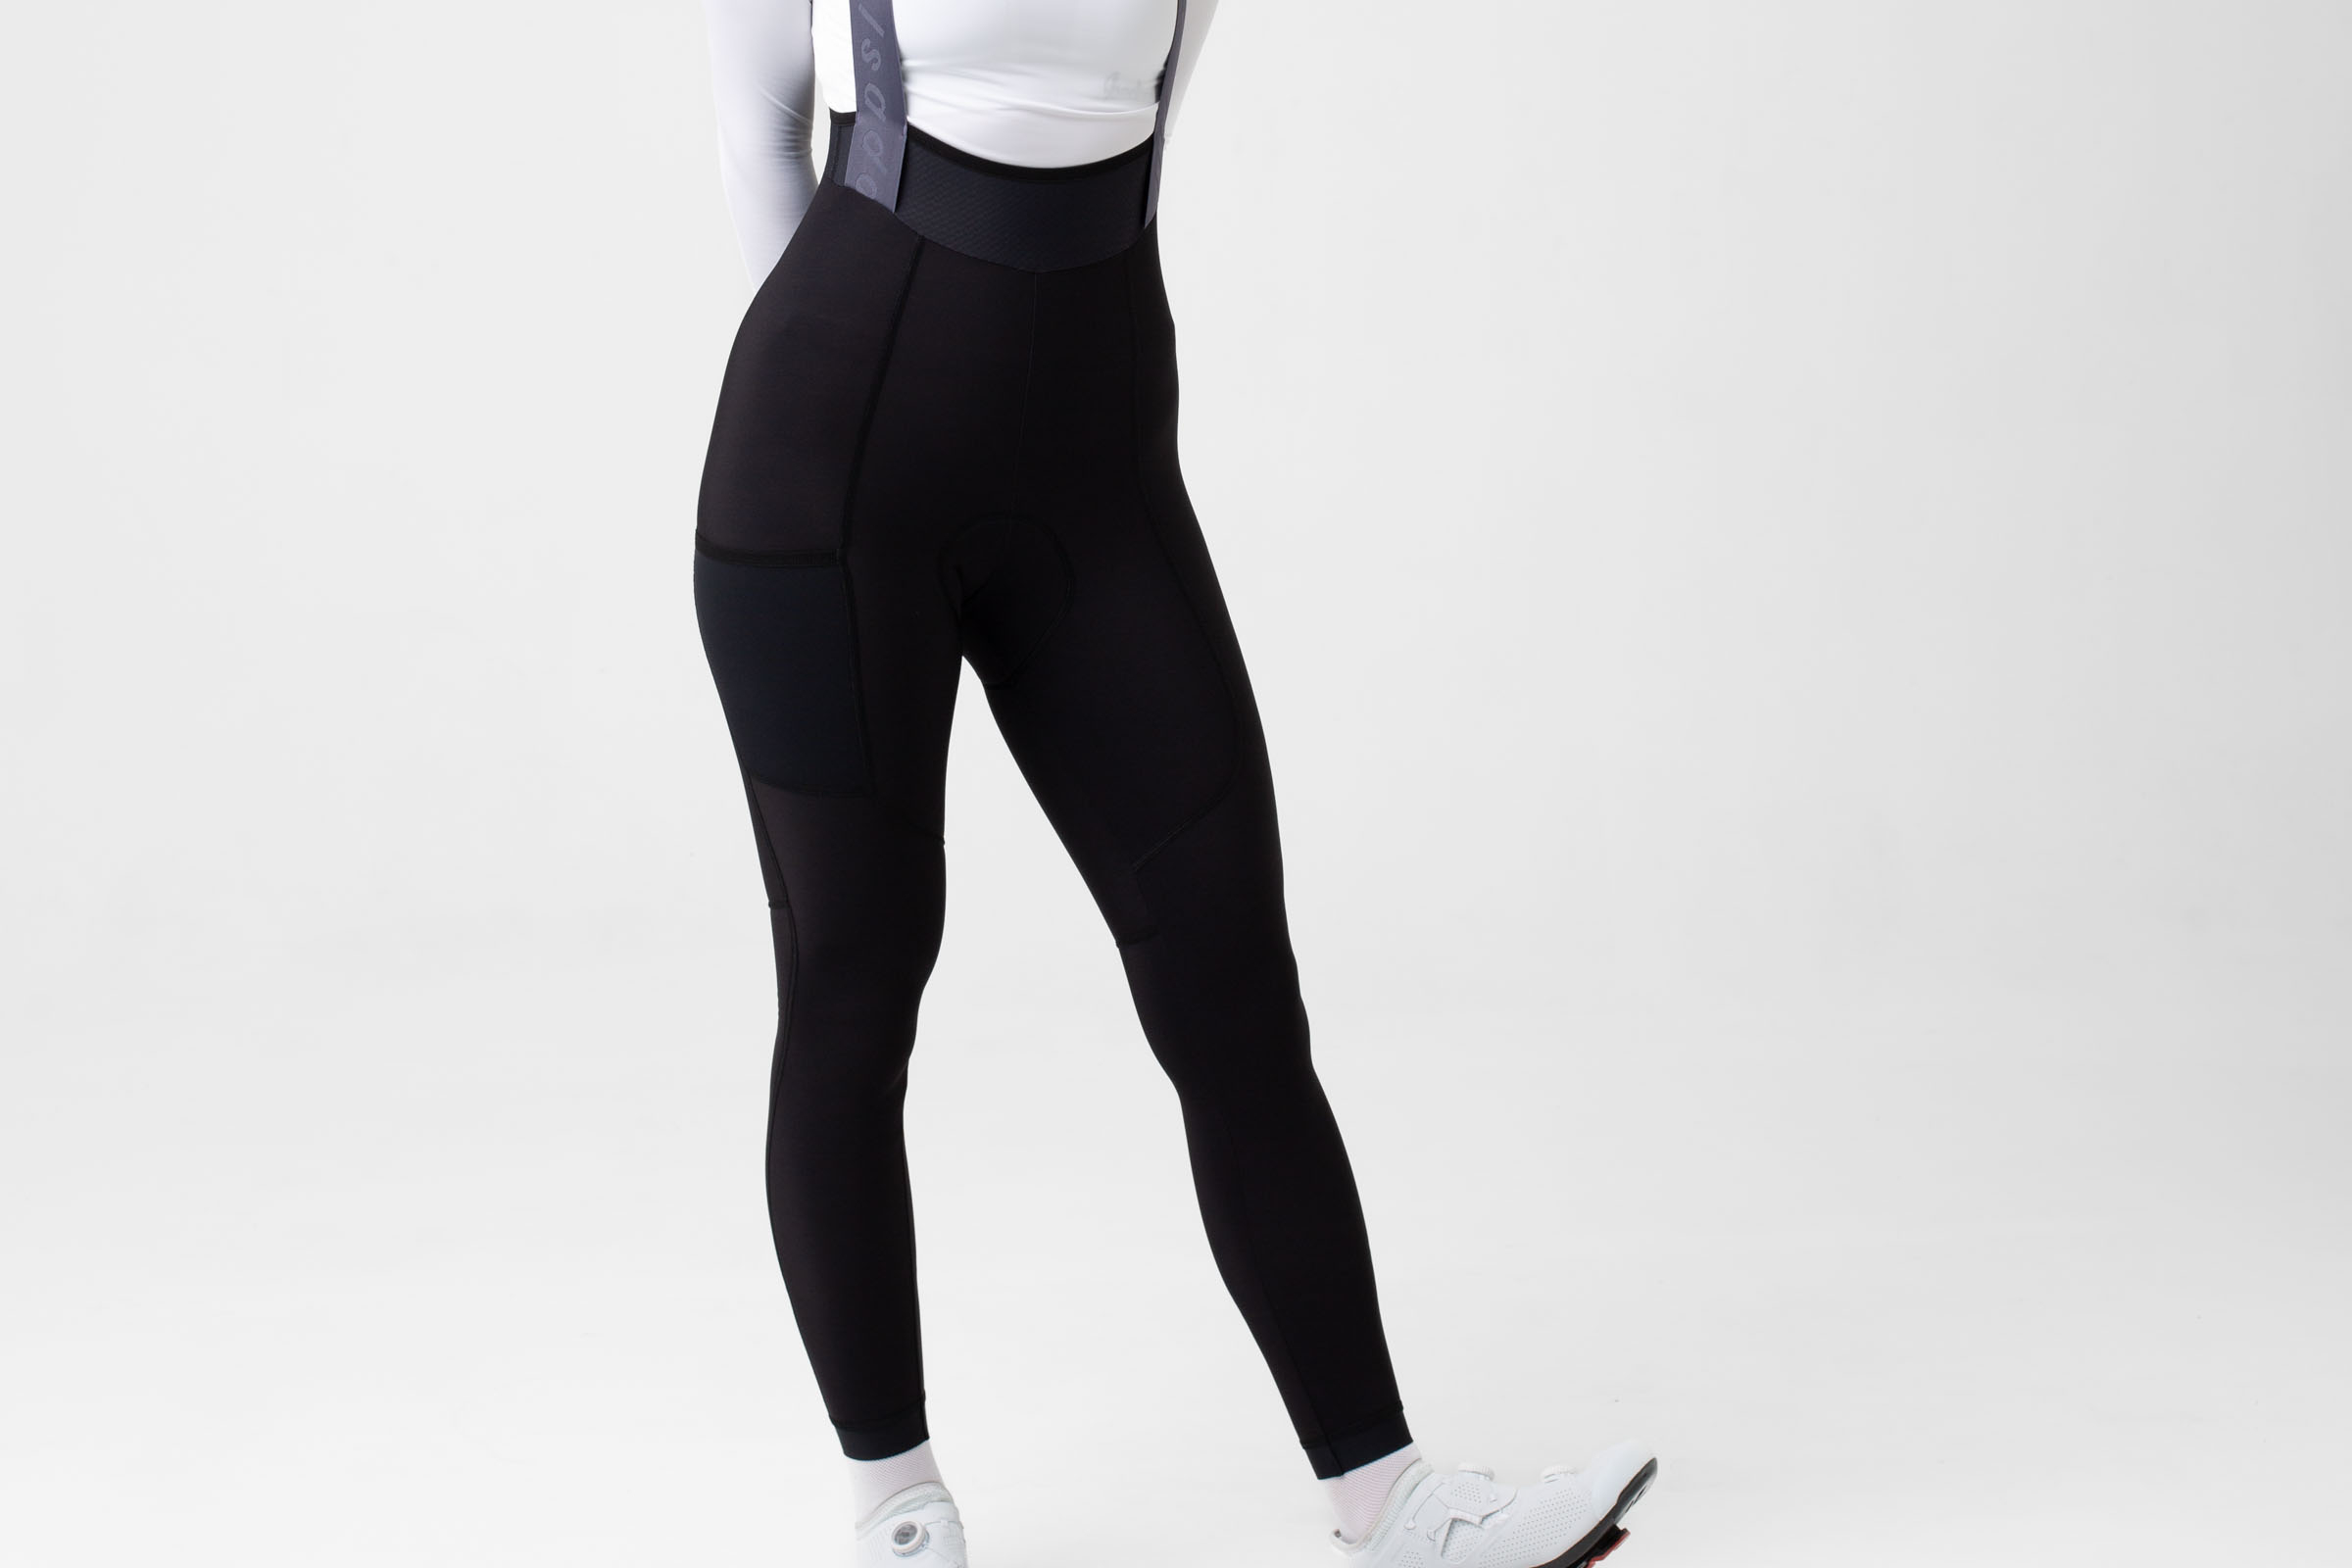 https://static.isadore.com/media/2023/09/9/9/women-s-signature-thermal-tights-black-2-0-99852-w2400-h1600-crop-flags1-v2.jpg